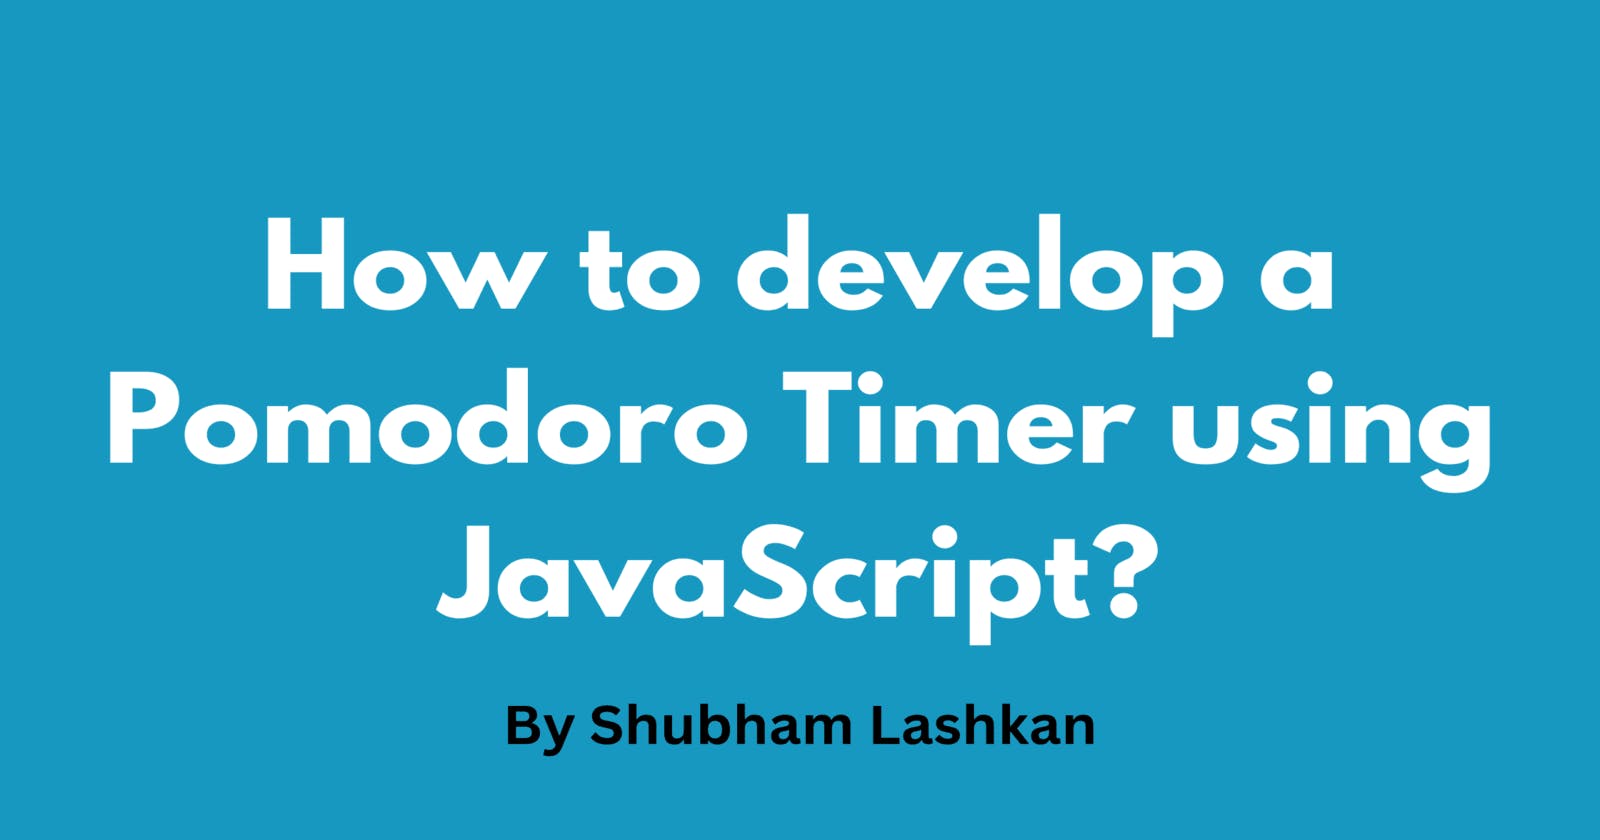 How to develop a Pomodoro Timer using JavaScript?